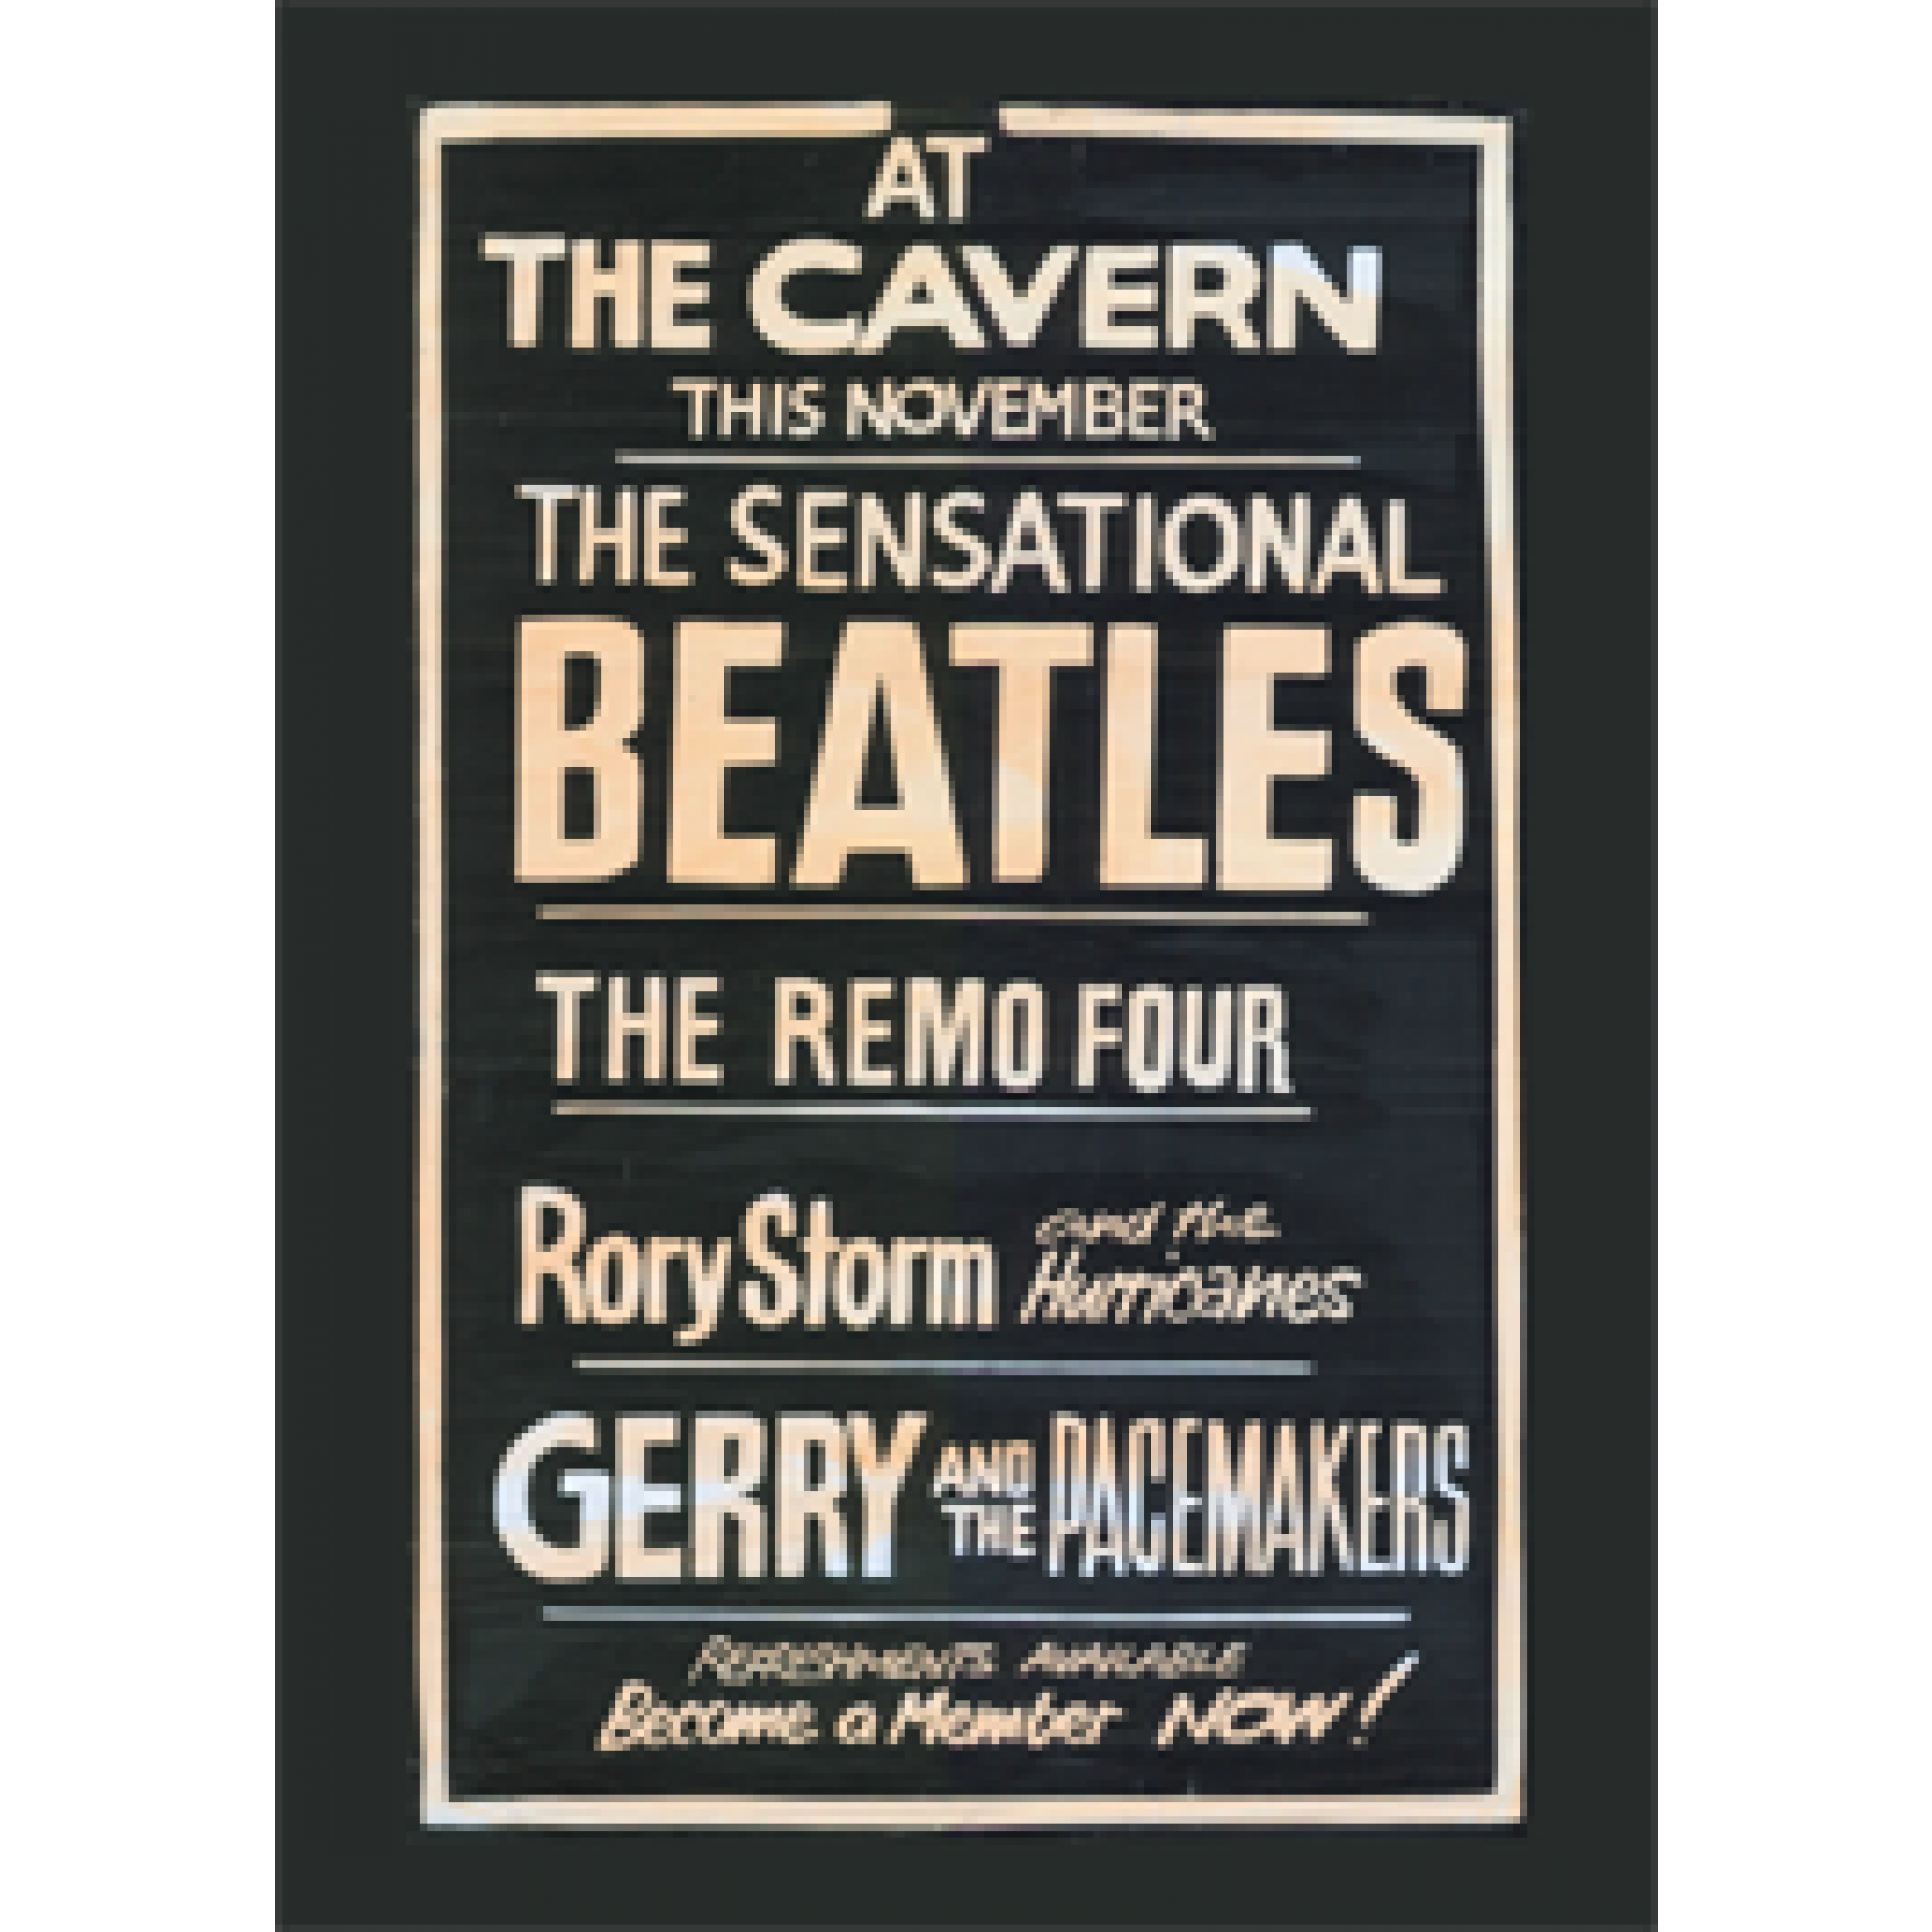 The Beatles Live at the Cavern new Official 76mm x 76mm Fridge Magnet